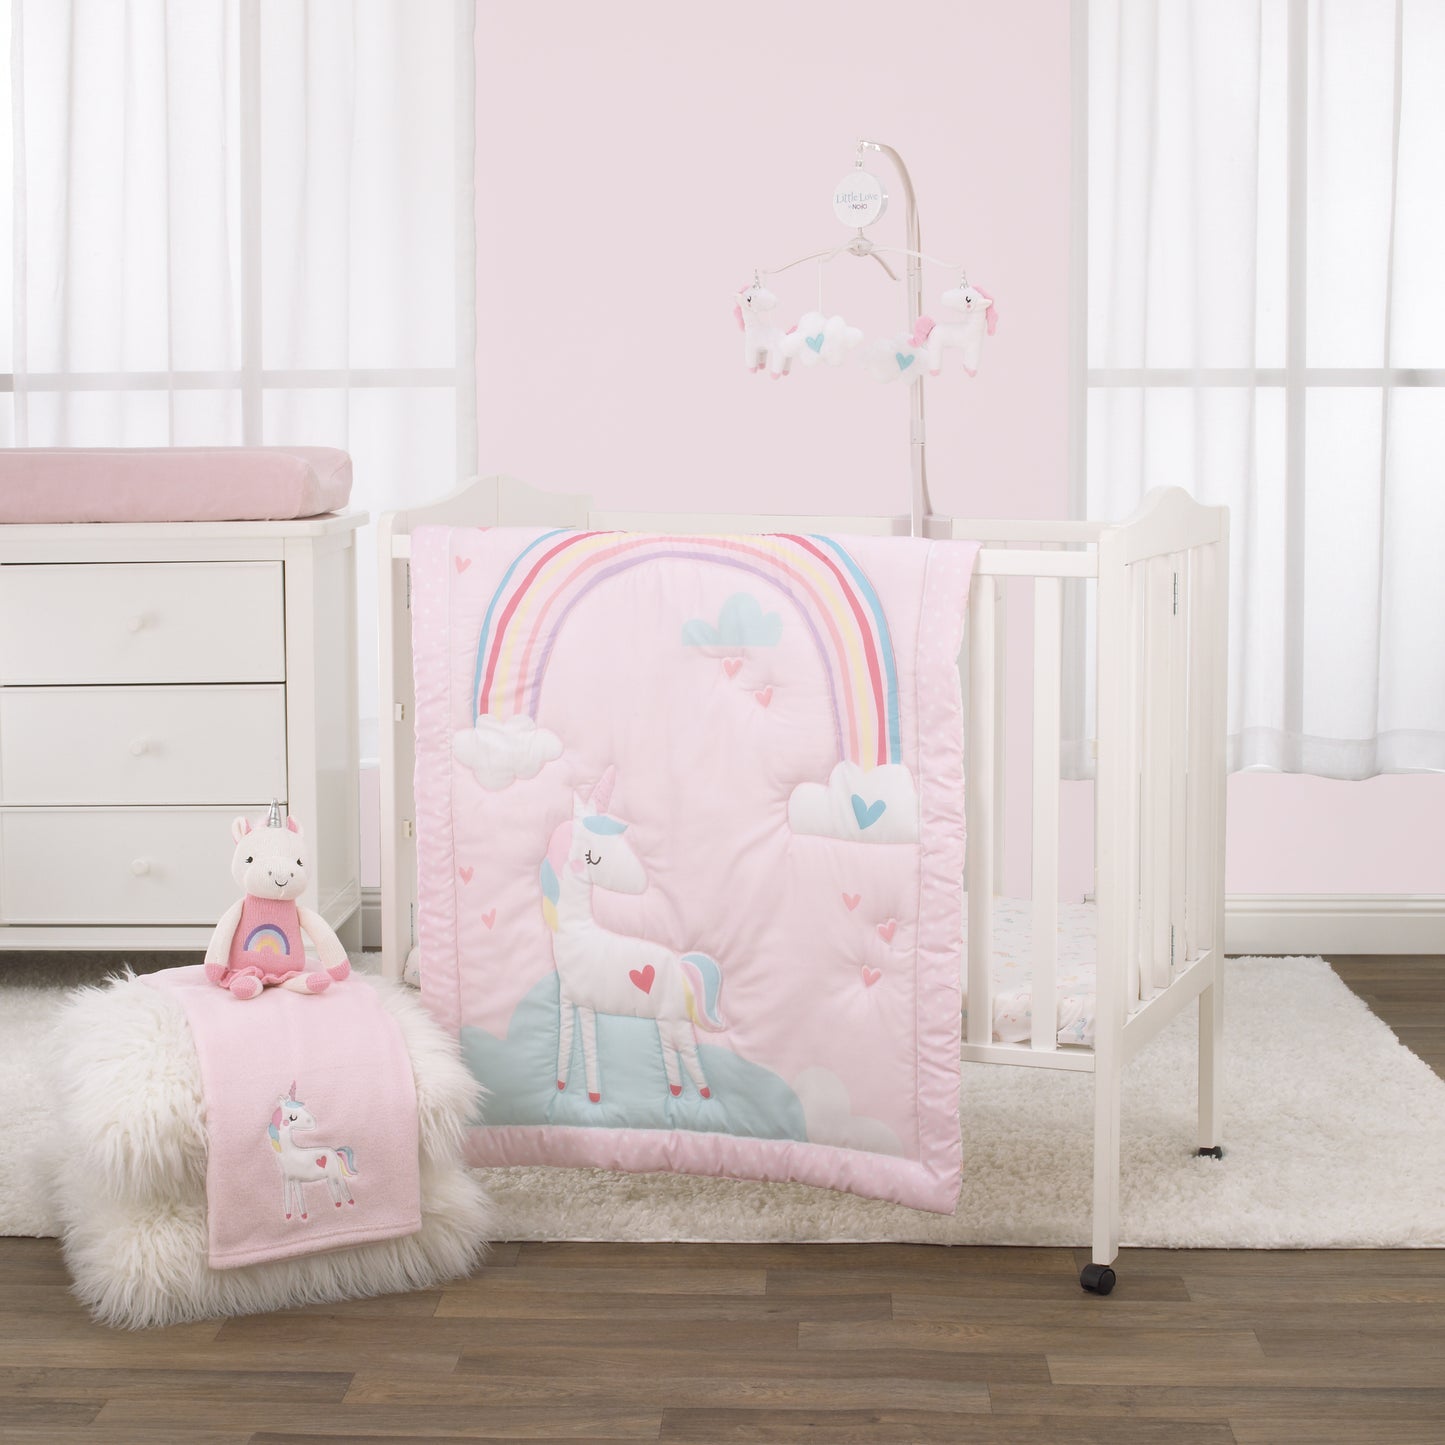 Little Love by NoJo Rainbow Unicorn Pink, Aqua, Yellow and White 3 Piece Mini Crib Bedding Set - Comforter and 2 Fitted Mini Crib Sheets